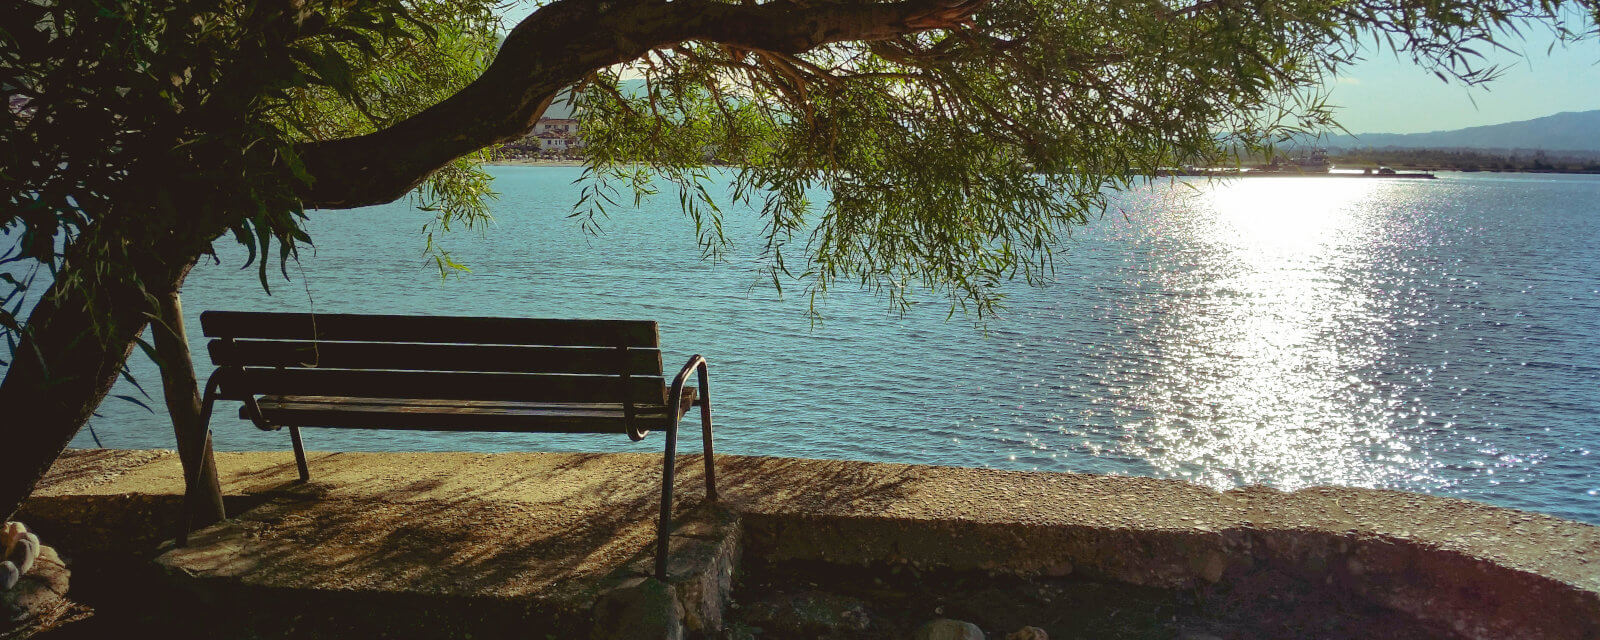 bench in front of lake